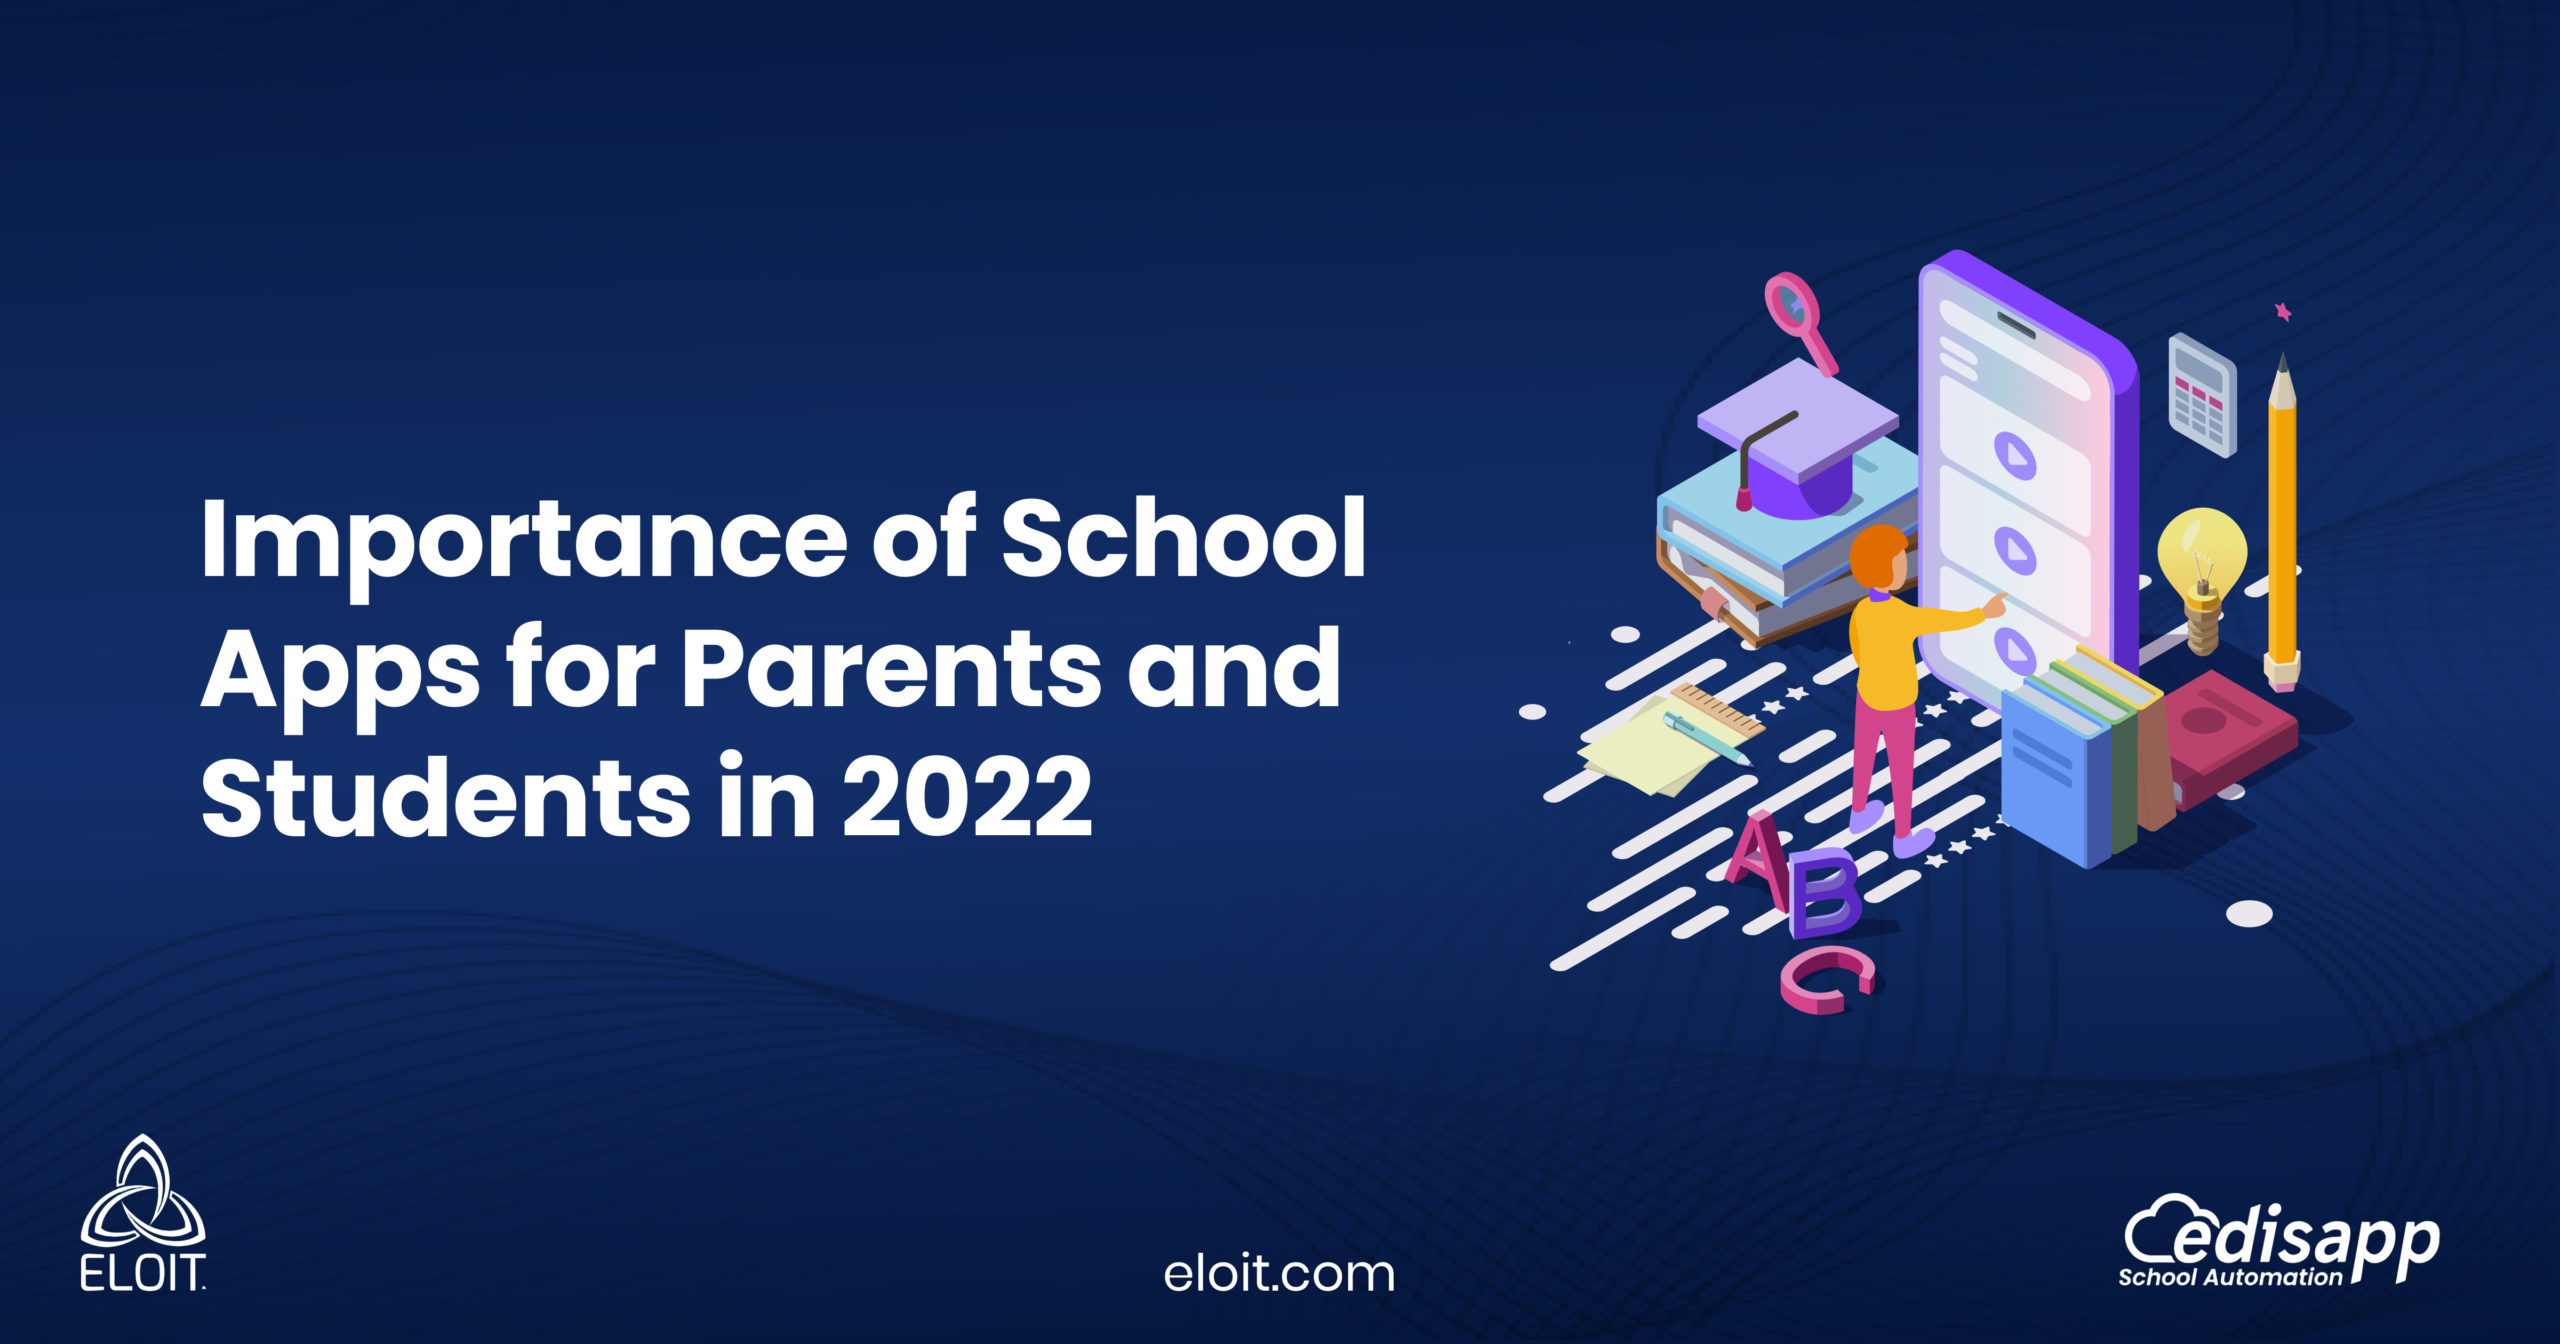 Importance of School Apps for Parents and Students in 2022